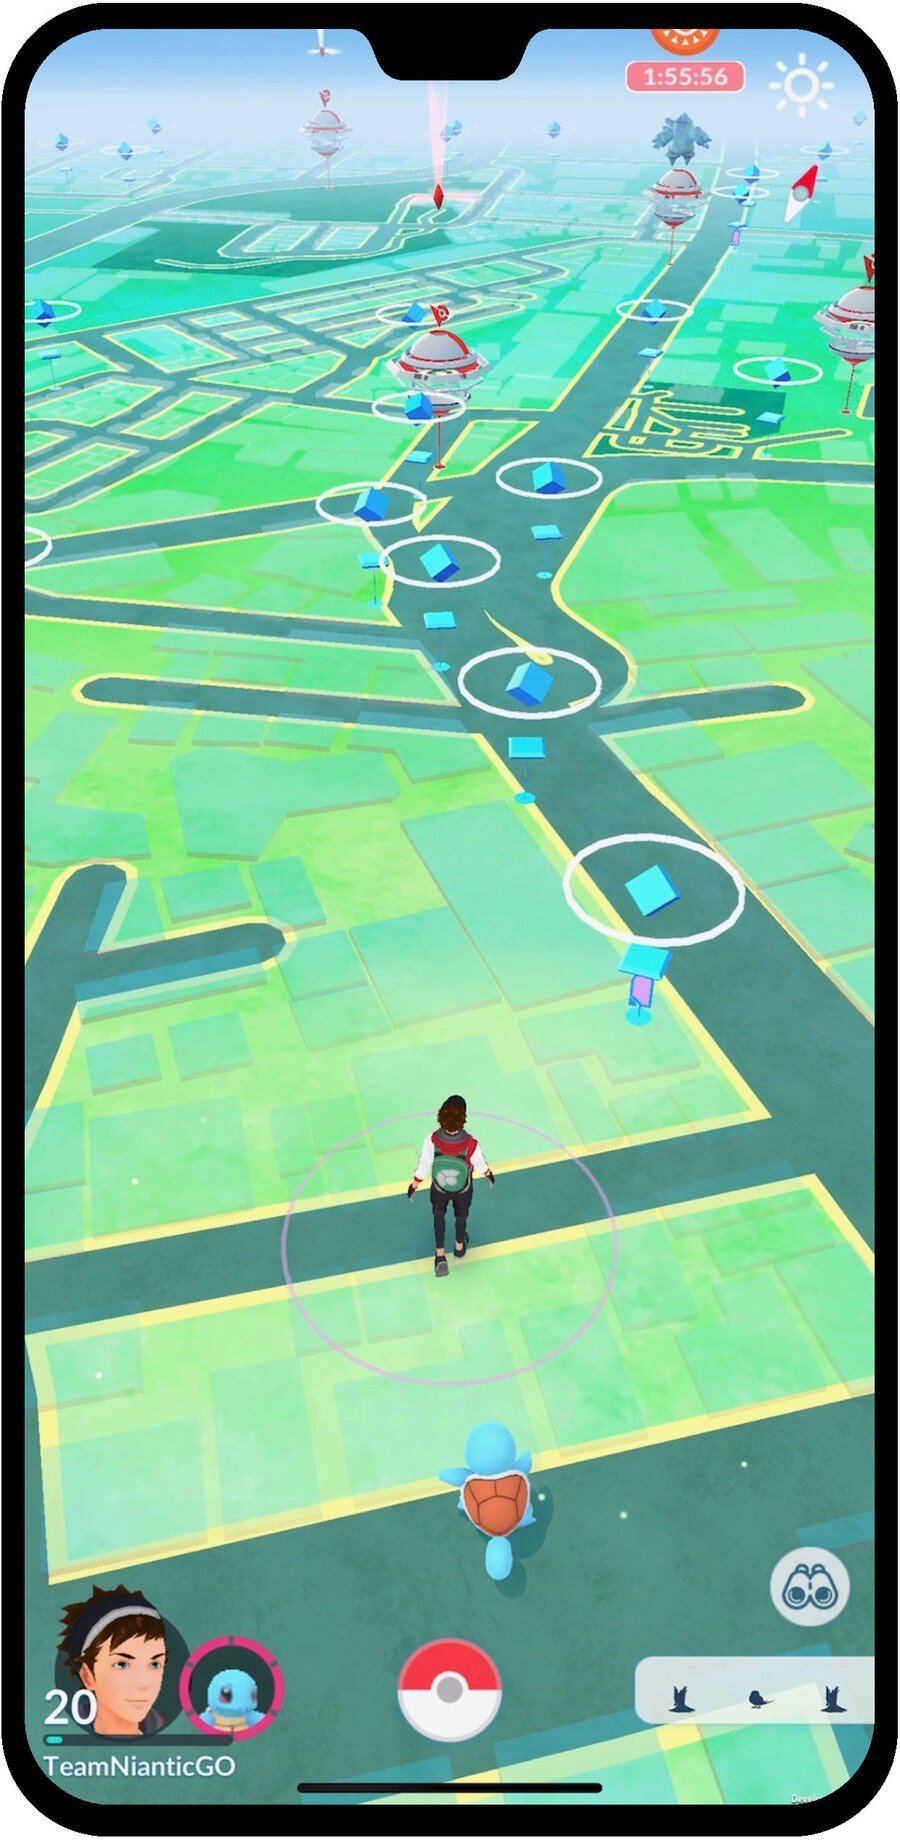 A recent update saw your Buddy Pokémon walk around with you on the map